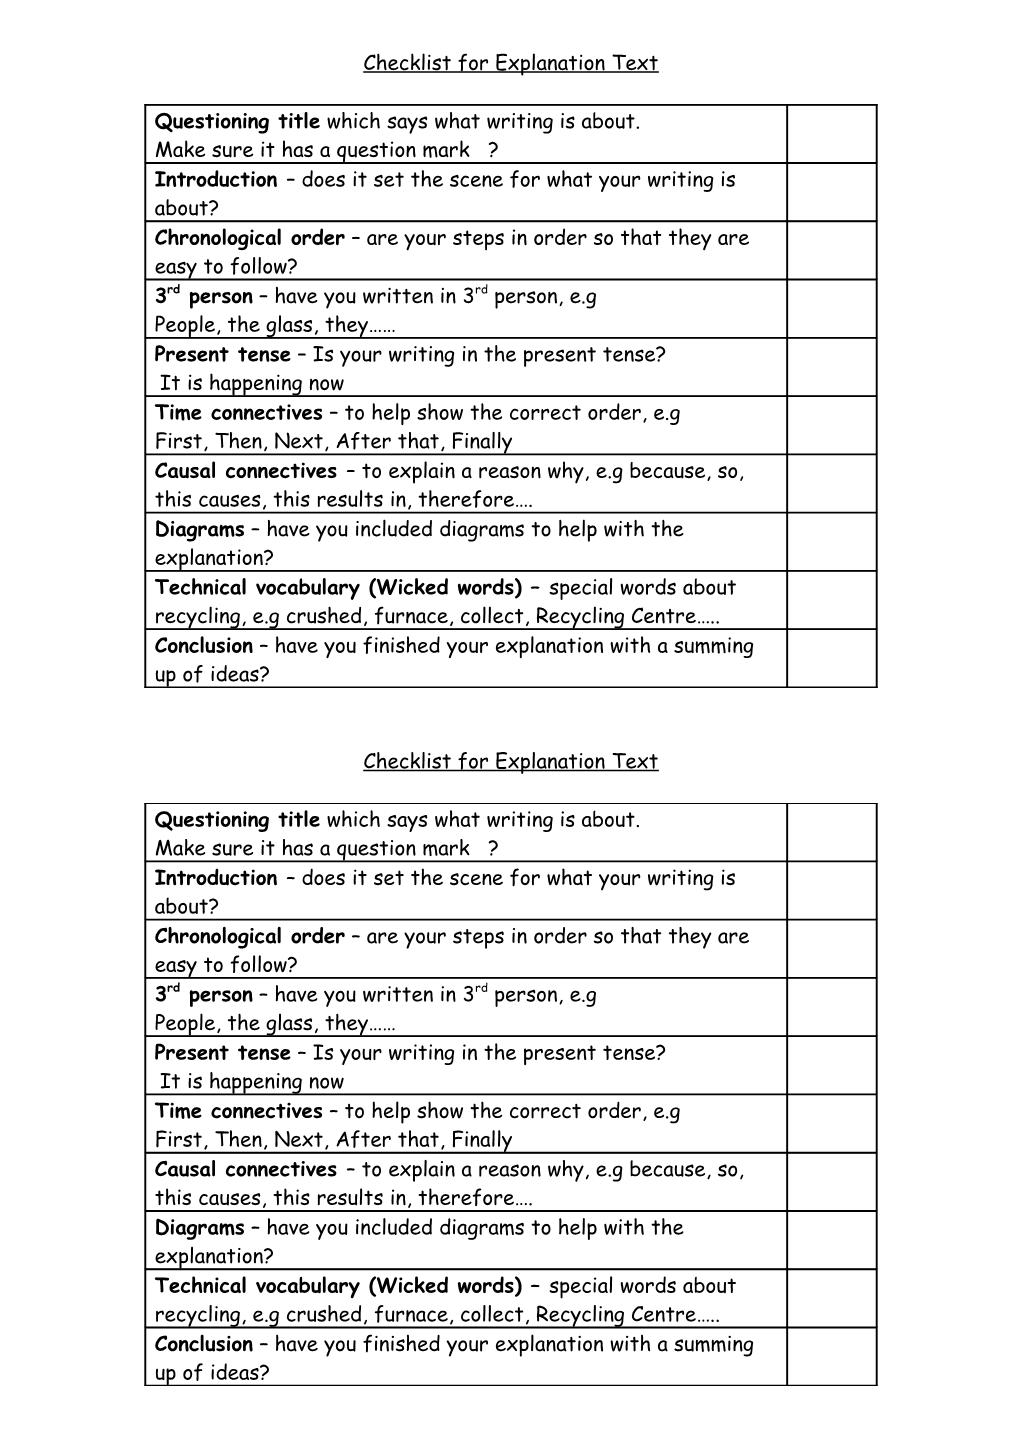 Checklist for Explanation Text